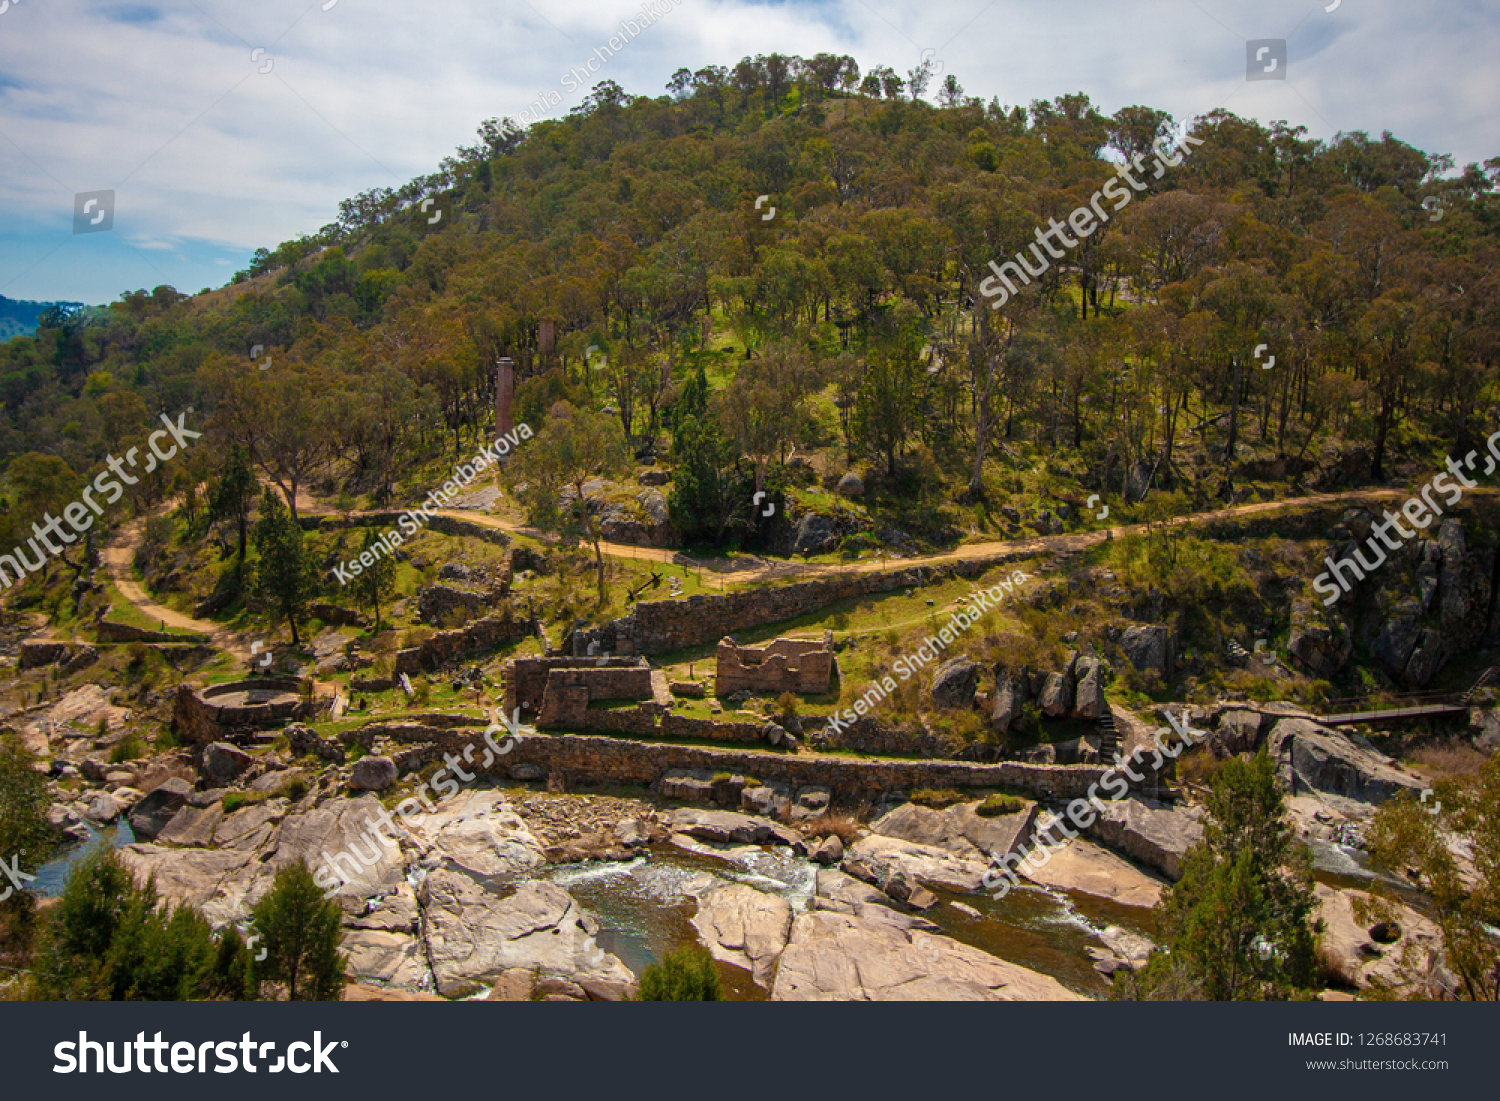 Narrow small mountain river at the foot of a round green hill. At the foot of the hill are the ruins of a gold factory. Australia. #1268683741